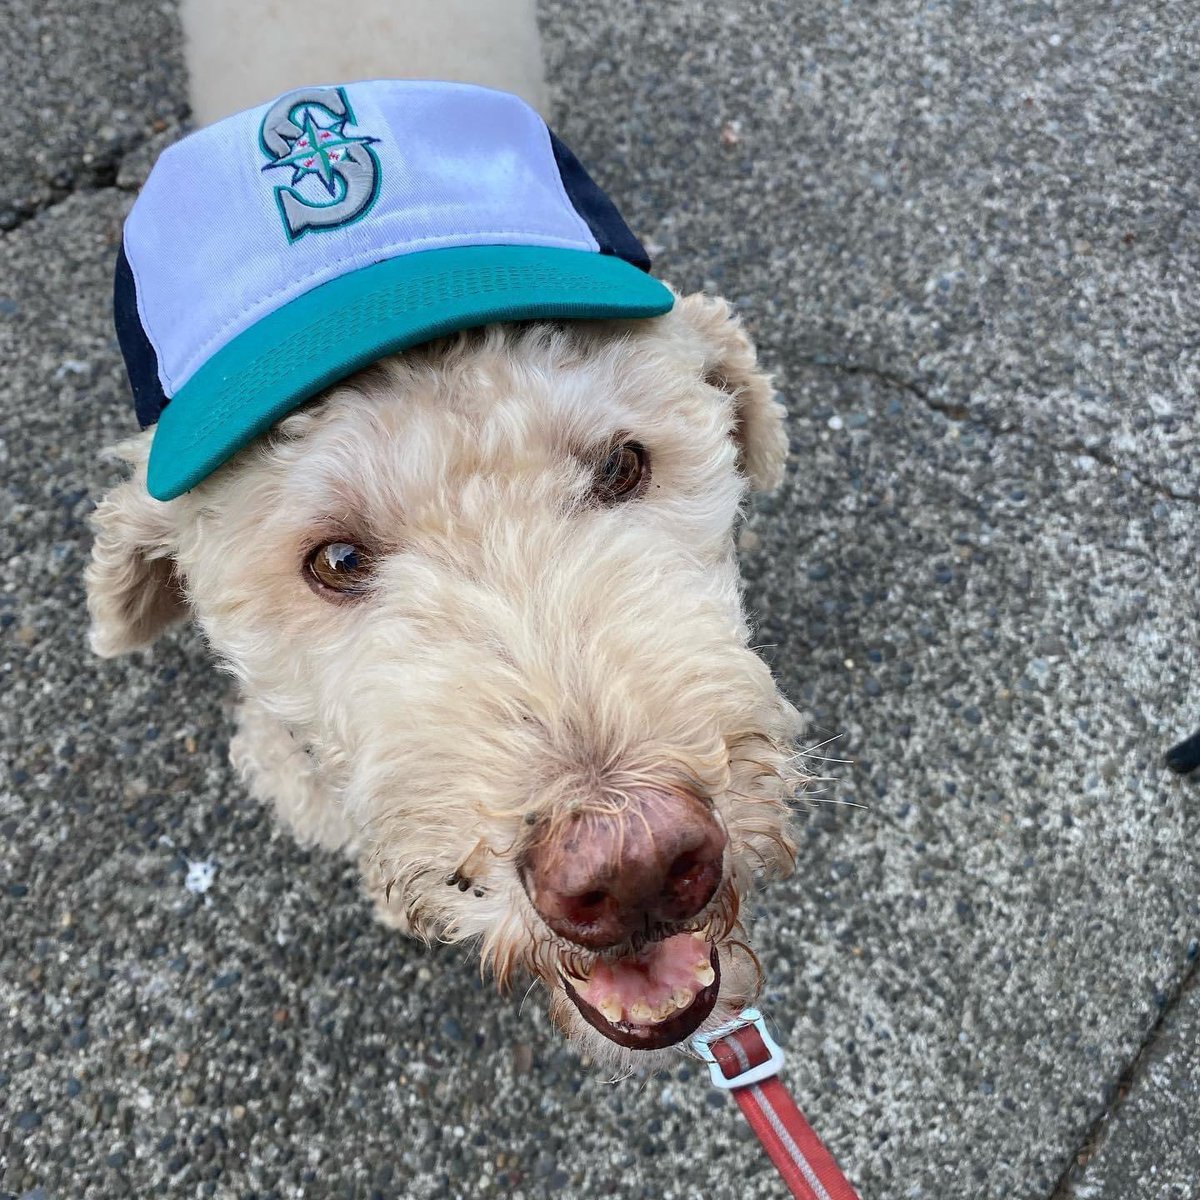 Happy #NationalPetDay from Otis, Seattle’s biggest Mariners fan!